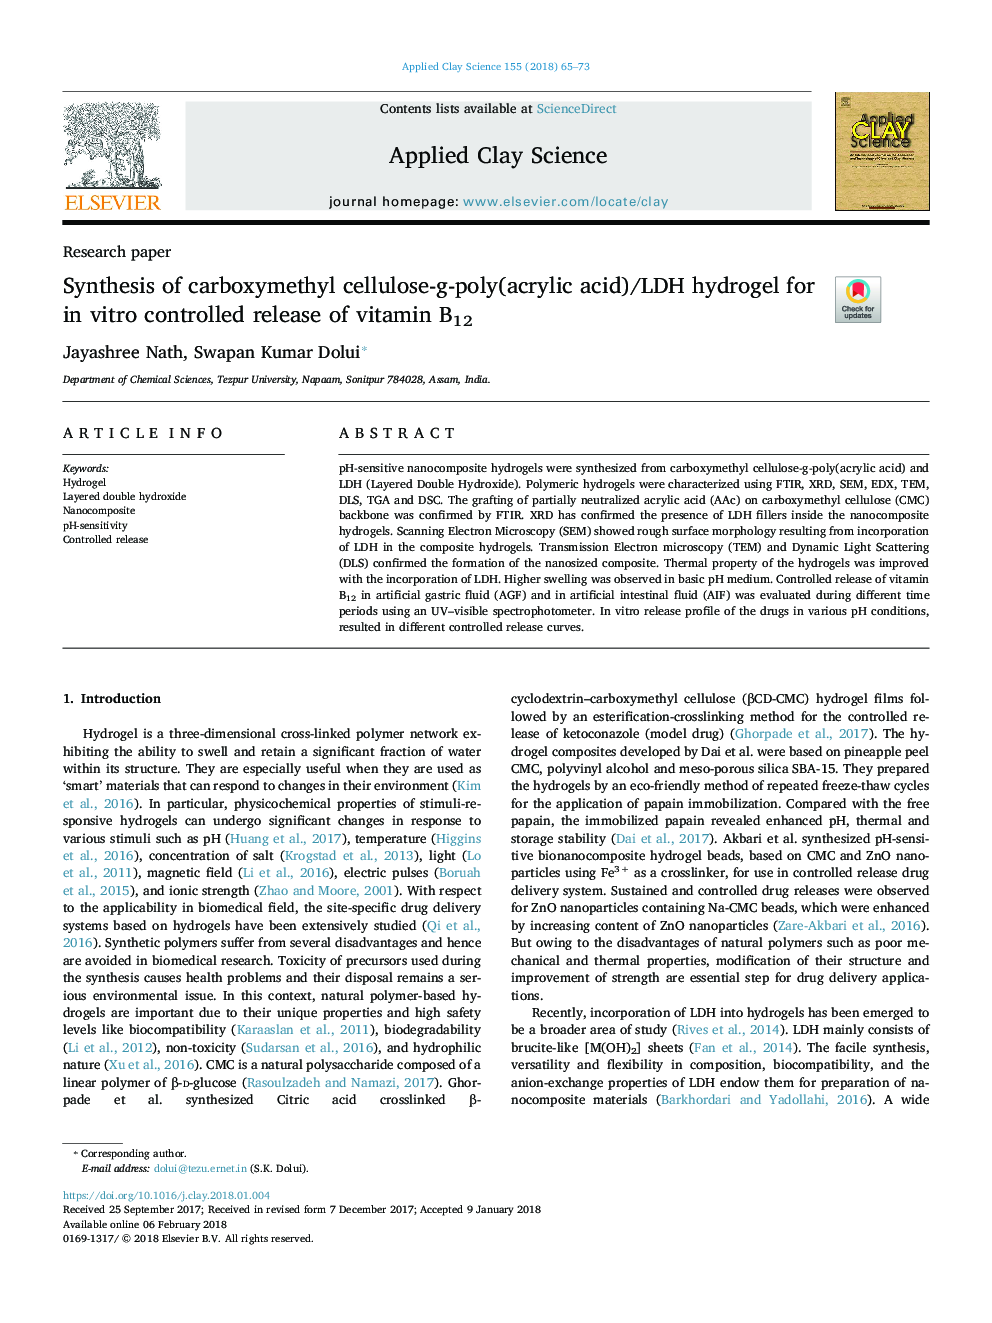 Synthesis of carboxymethyl cellulose-g-poly(acrylic acid)/LDH hydrogel for in vitro controlled release of vitamin B12